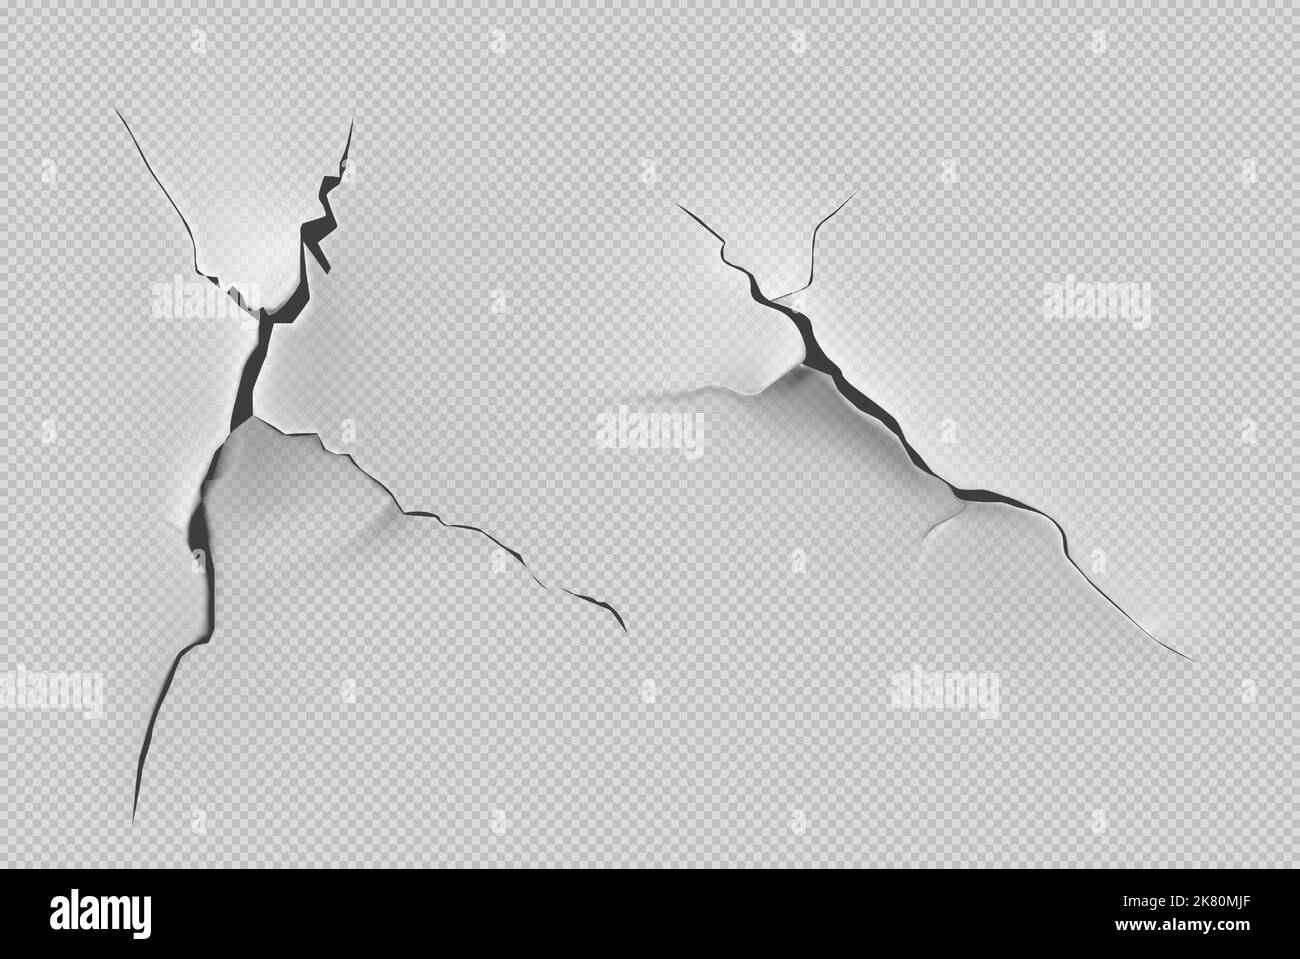 Crack of paint or paper isolated on transparent background. Closeup view of badly fixed building facade wall covered with gaps in stucco with flappy peeling edges Realistic 3d vector illustration Stock Vector